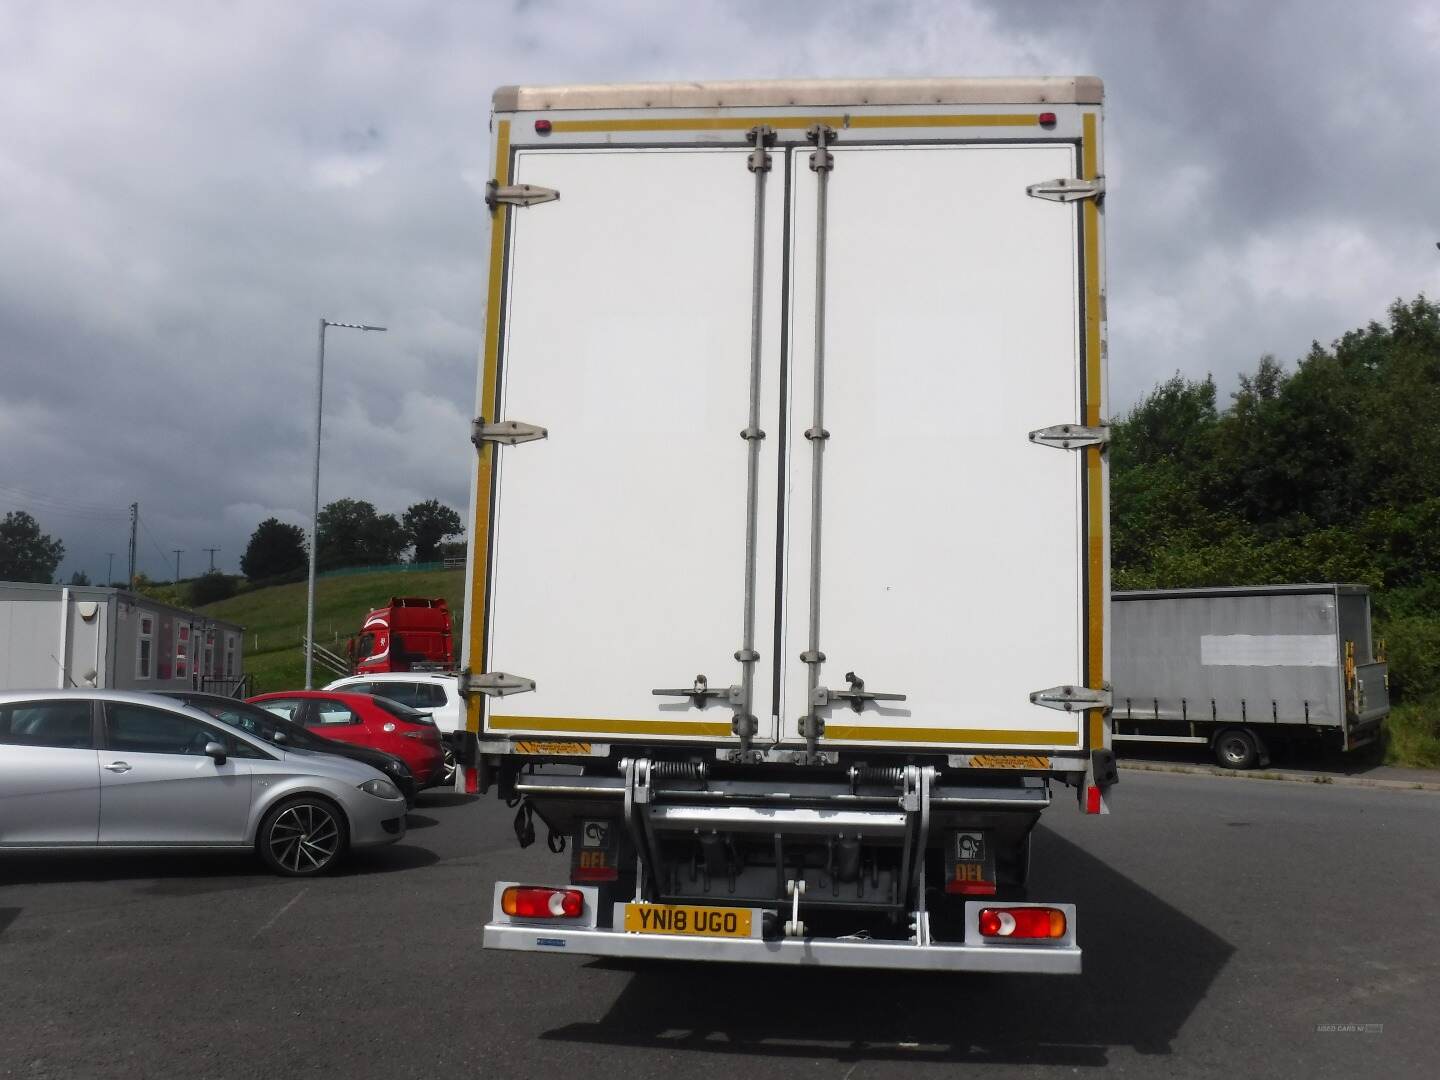 Daf LF 260 18000kg gross curtainsider with tail lift . in Down